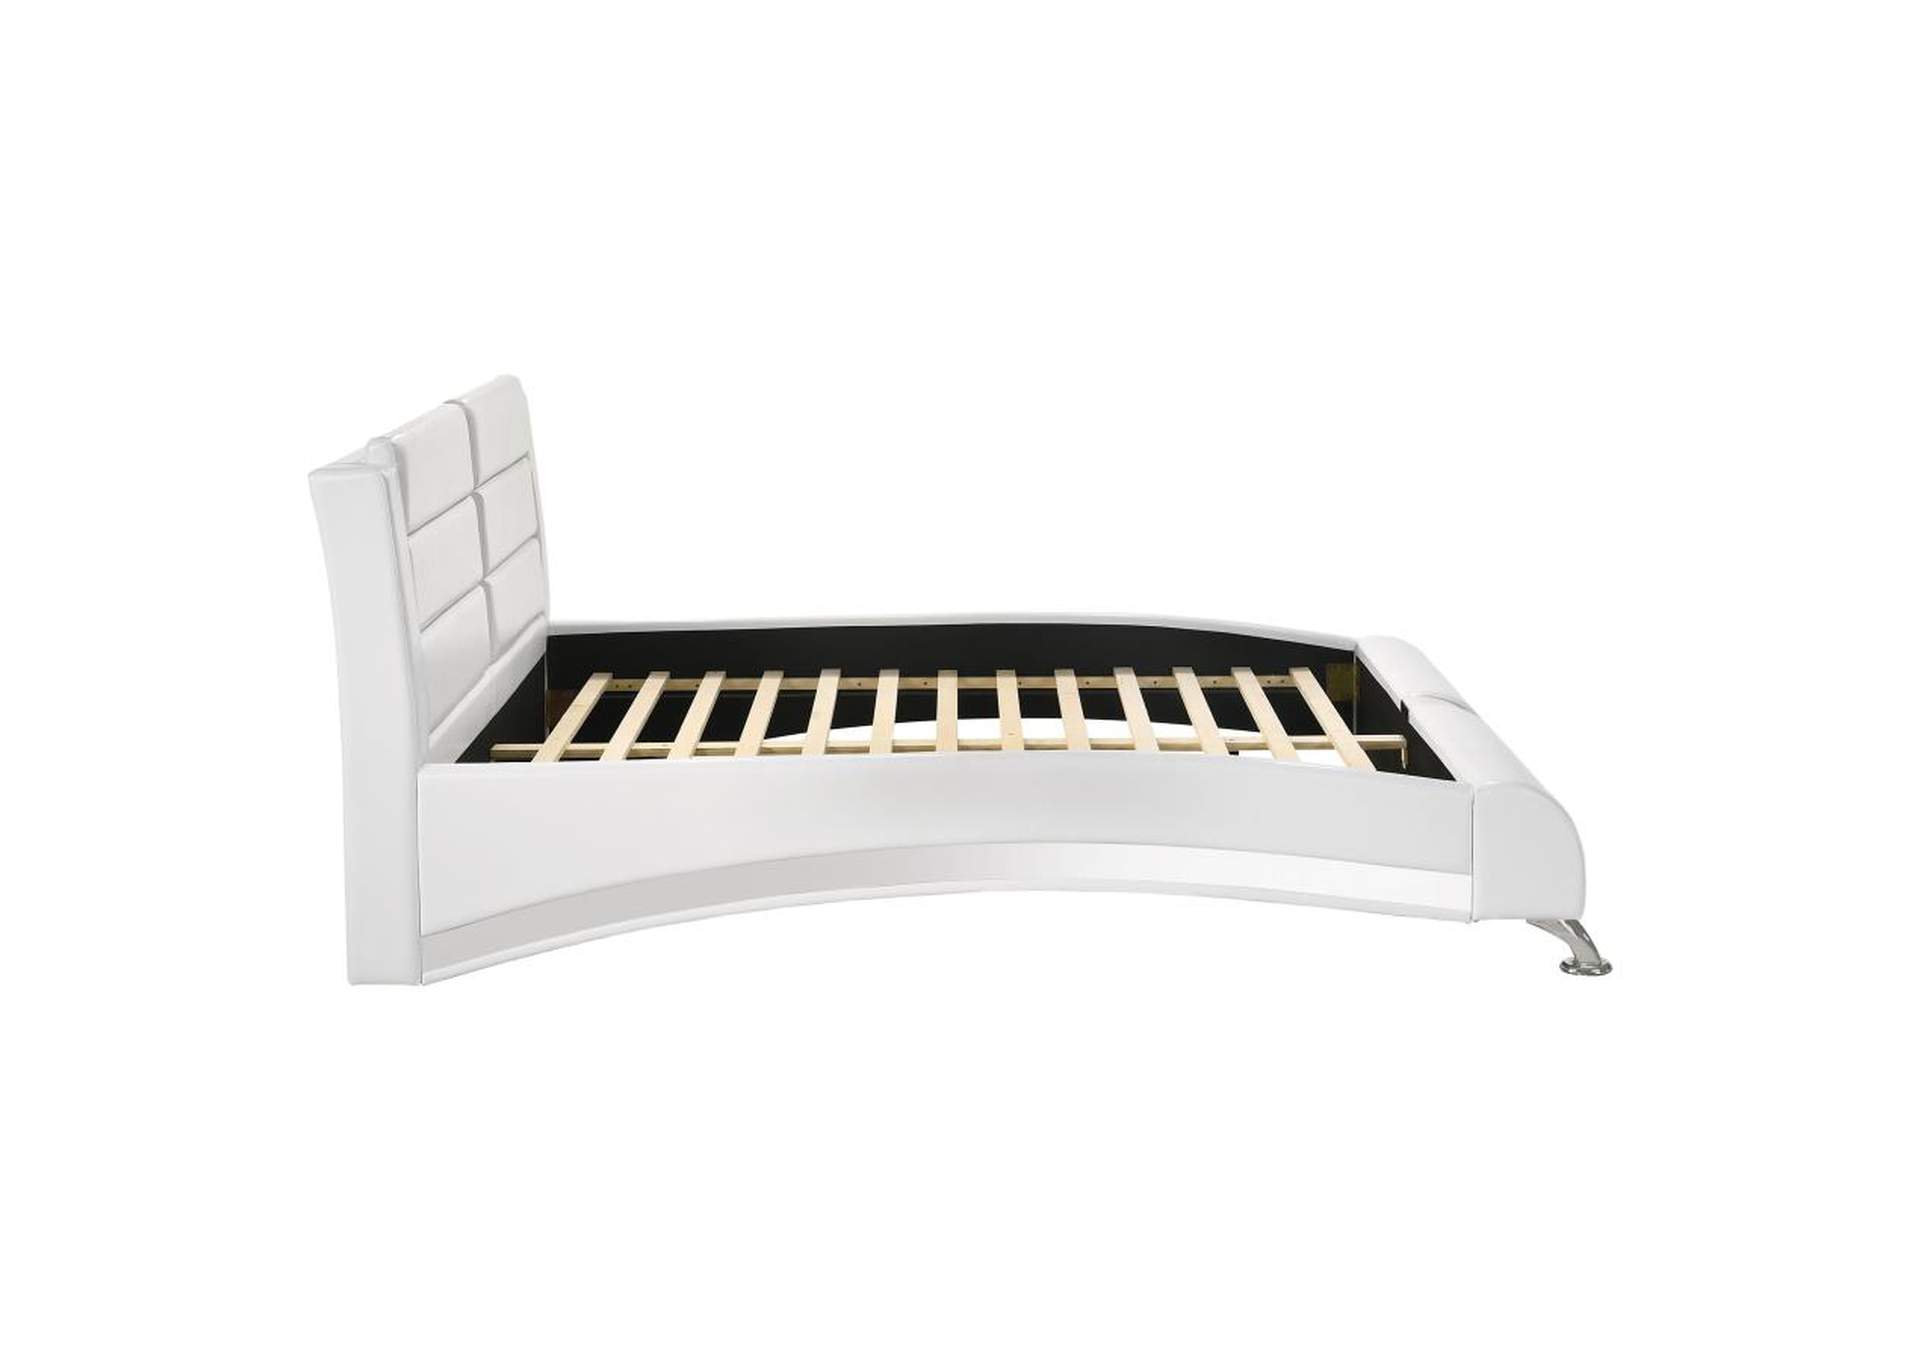 Jeremaine Queen Upholstered Bed White,Coaster Furniture